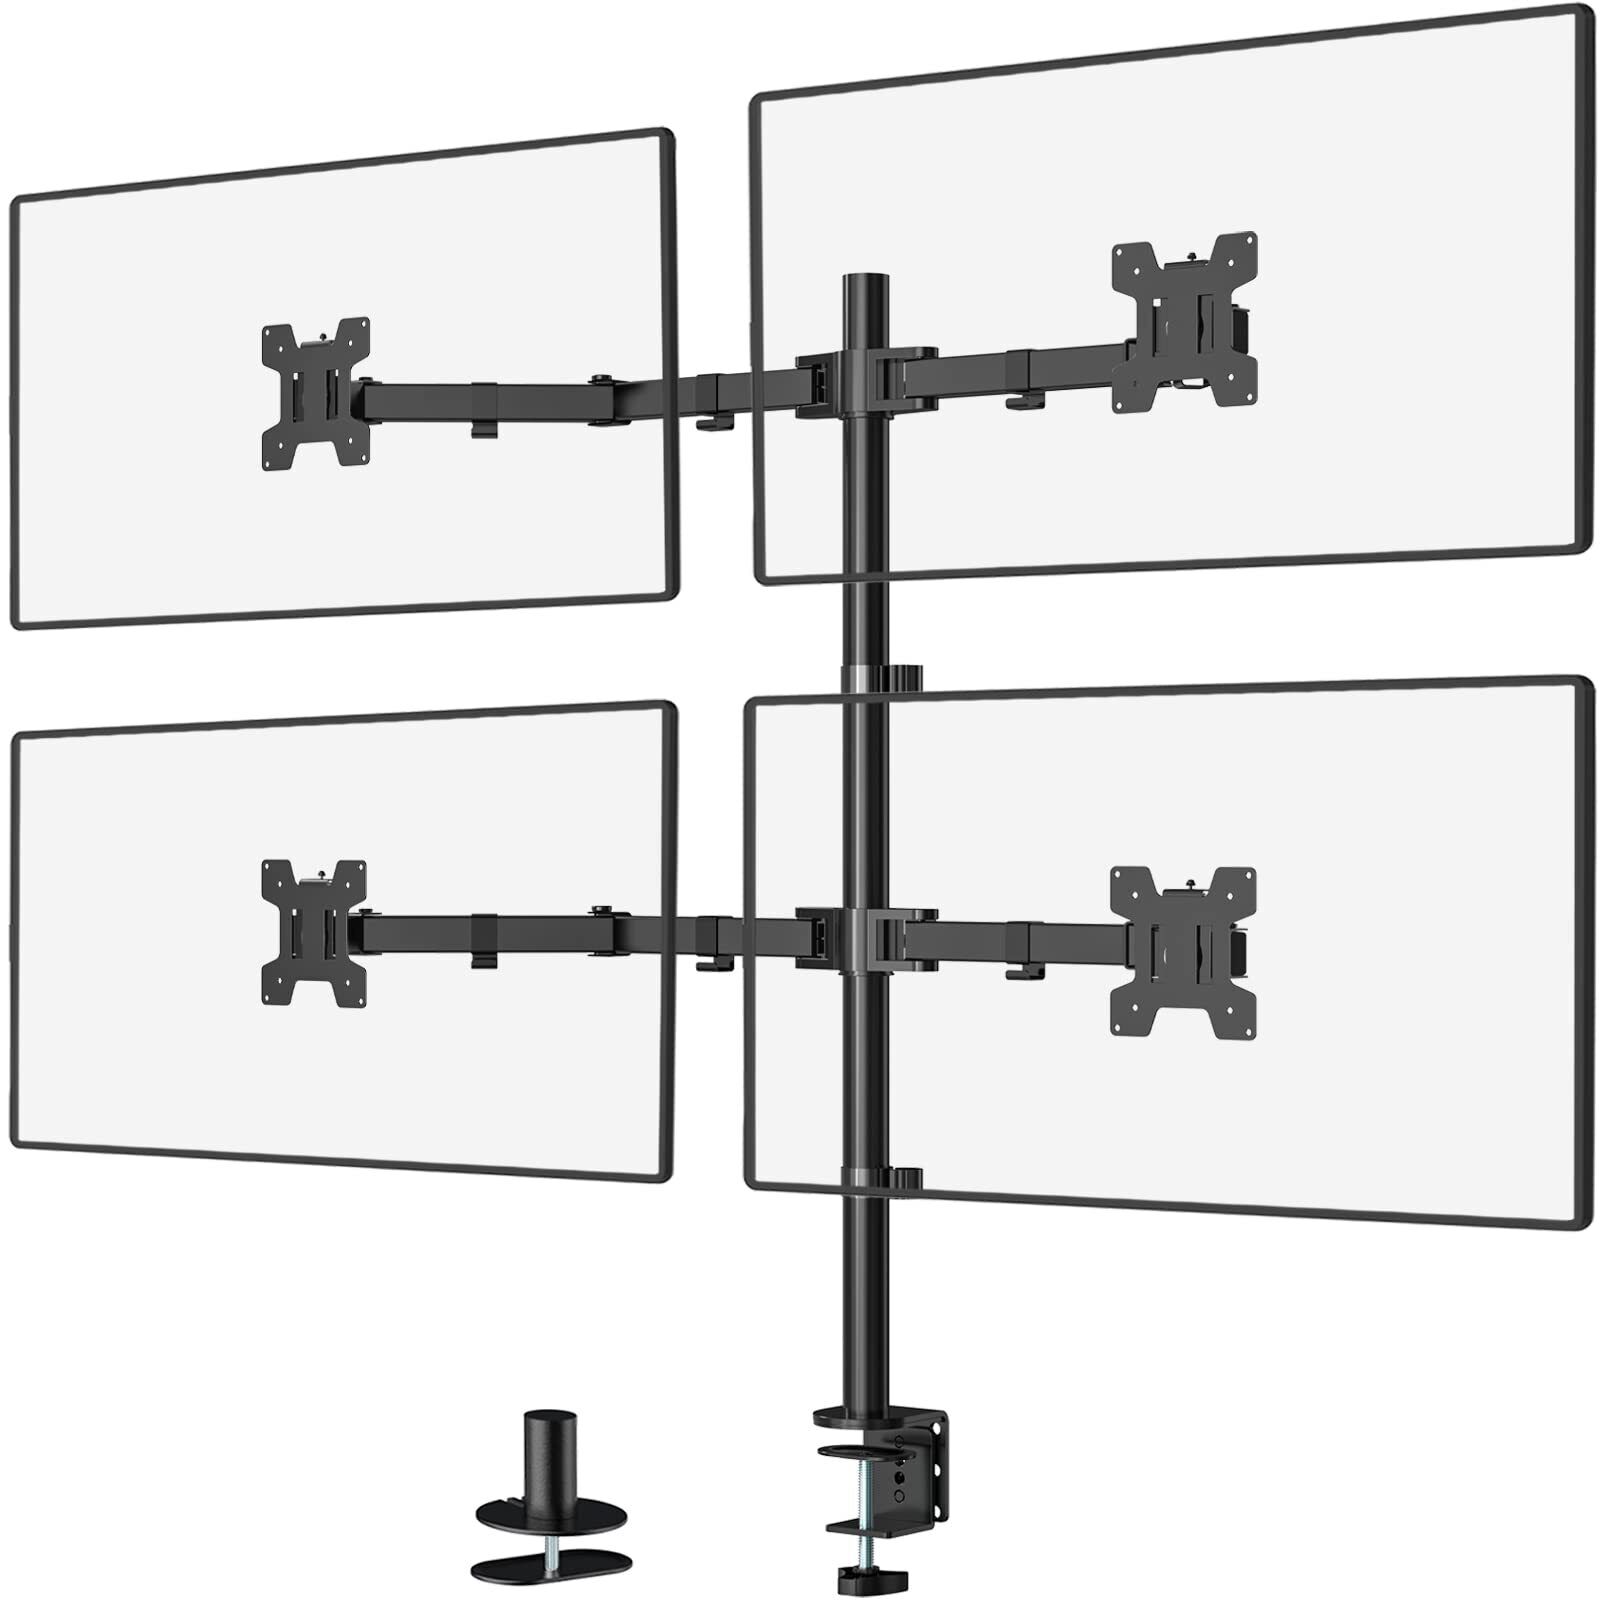 WALI Quad Monitor Desk Mount 4 Monitor Stand Fits Heavy Duty Computer Screen up